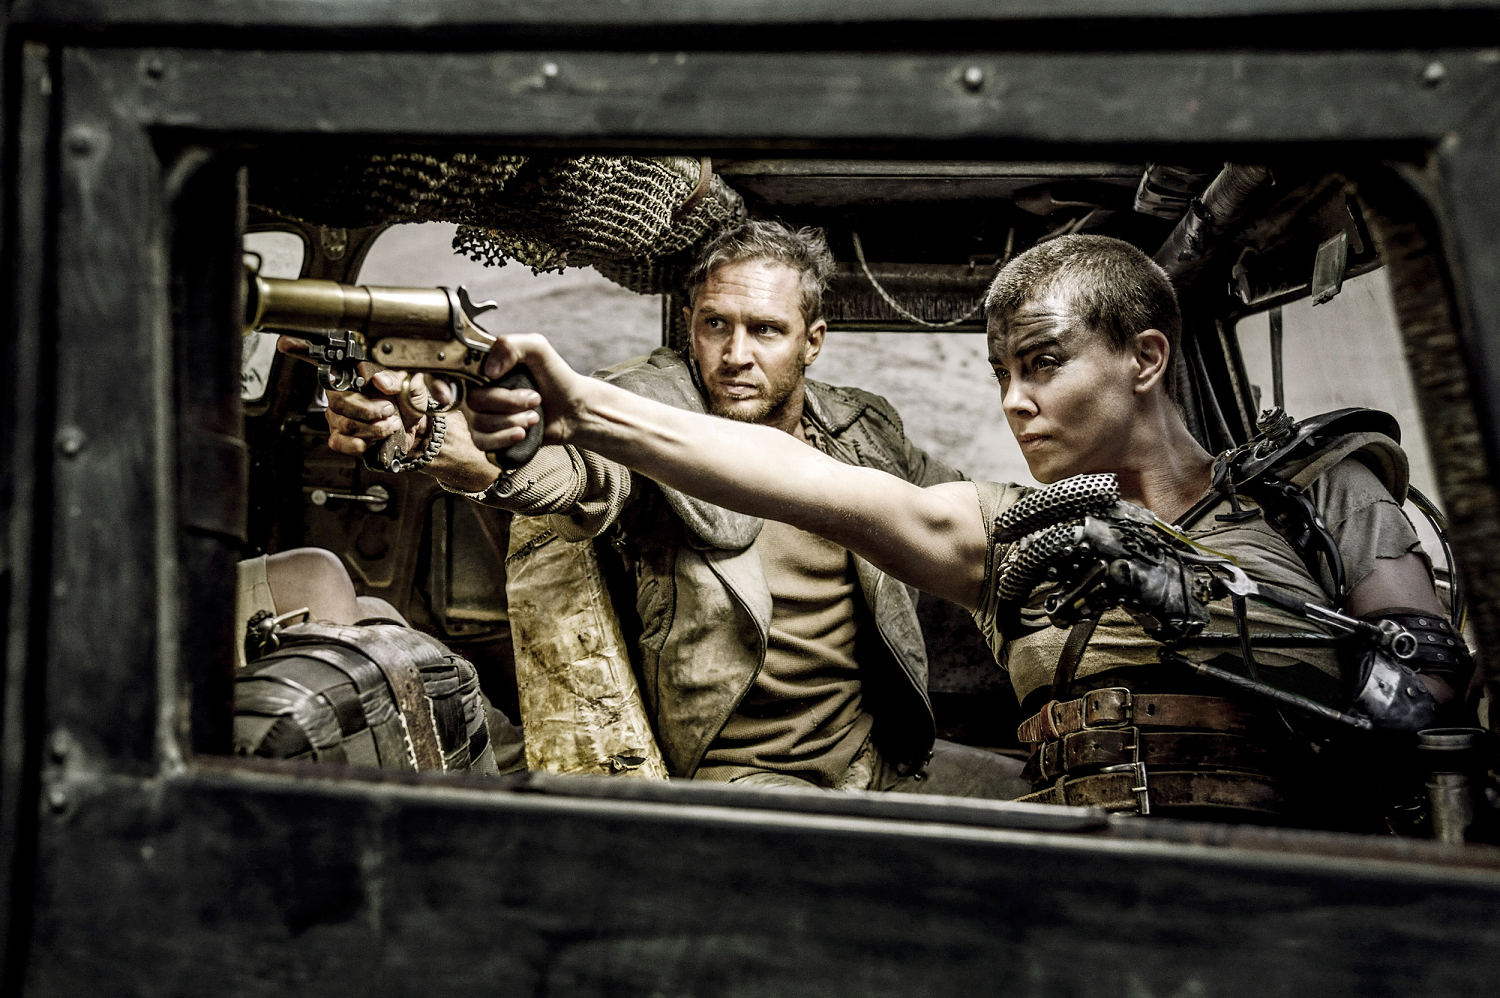 'Mad Max' director says 'there's no excuse' for Tom Hardy and Charlize Theron's 'Fury Road' feud